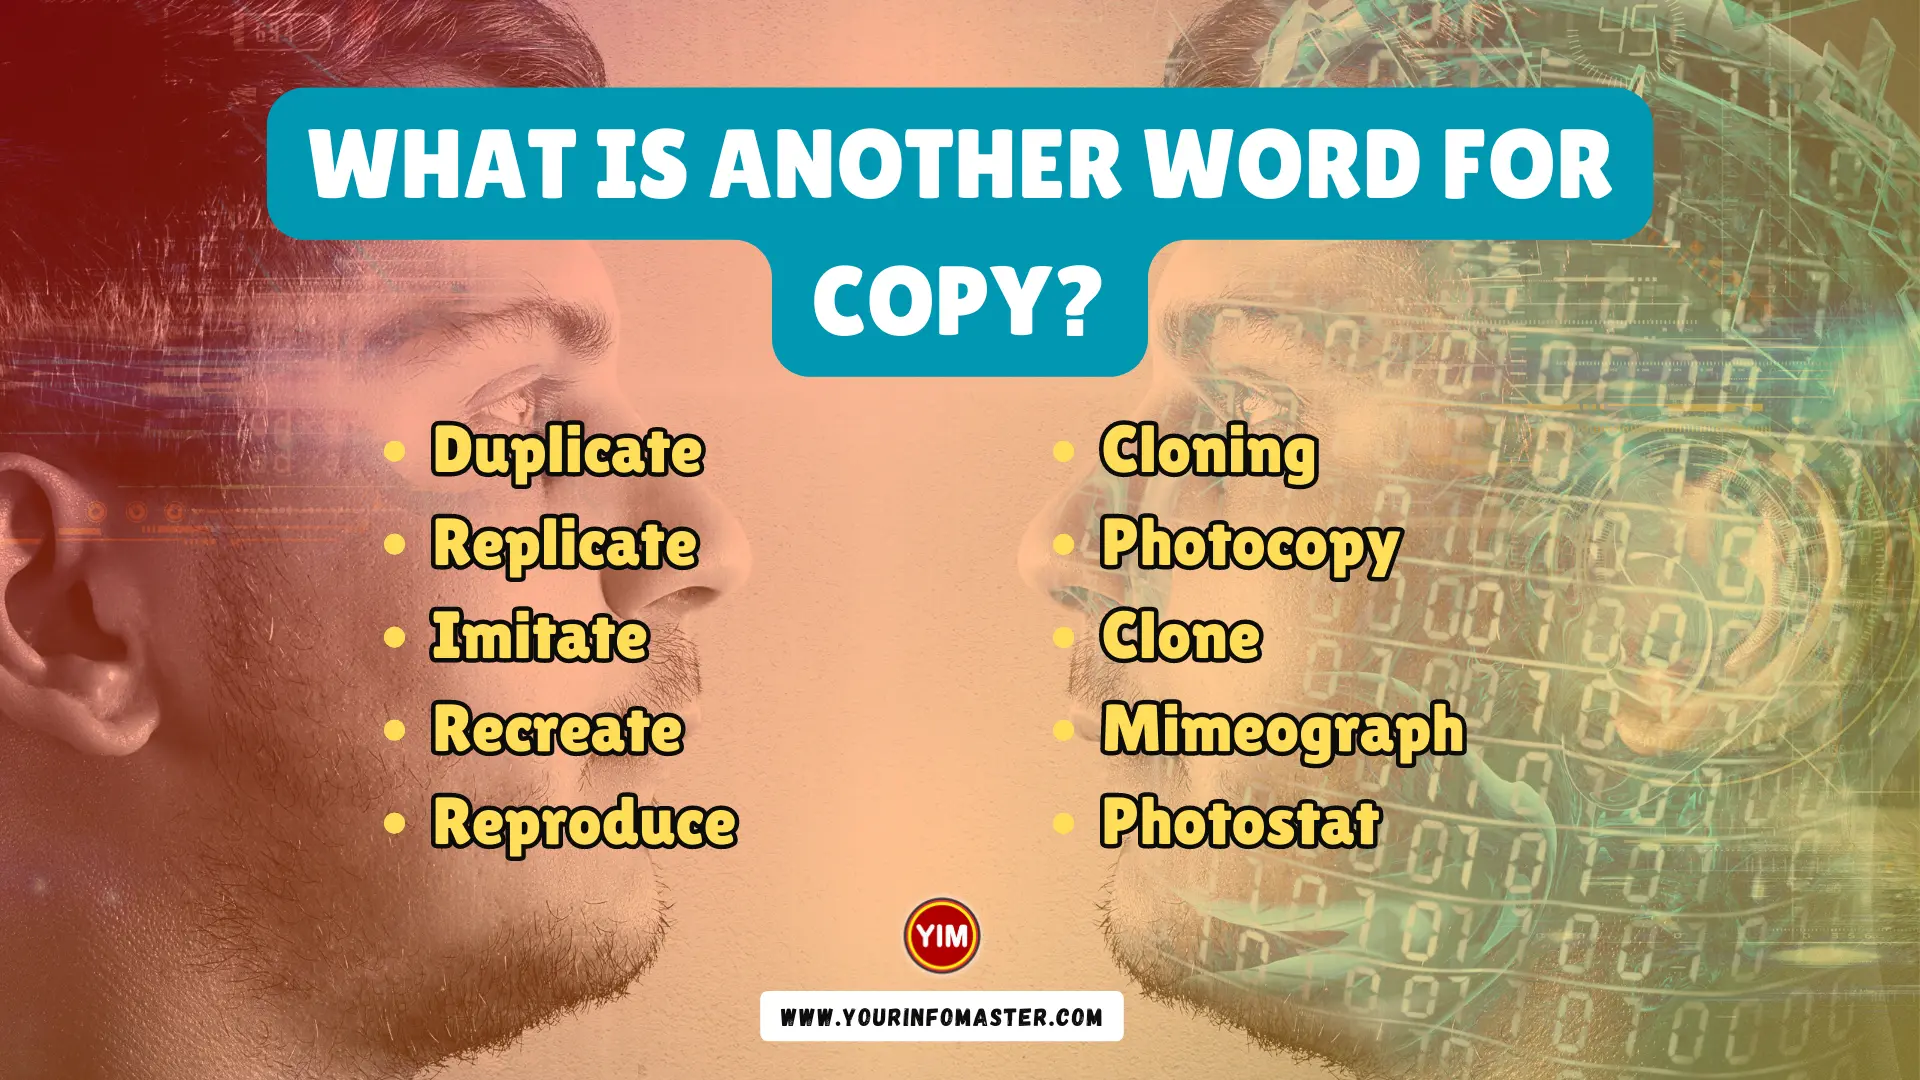 What is another word for Copy